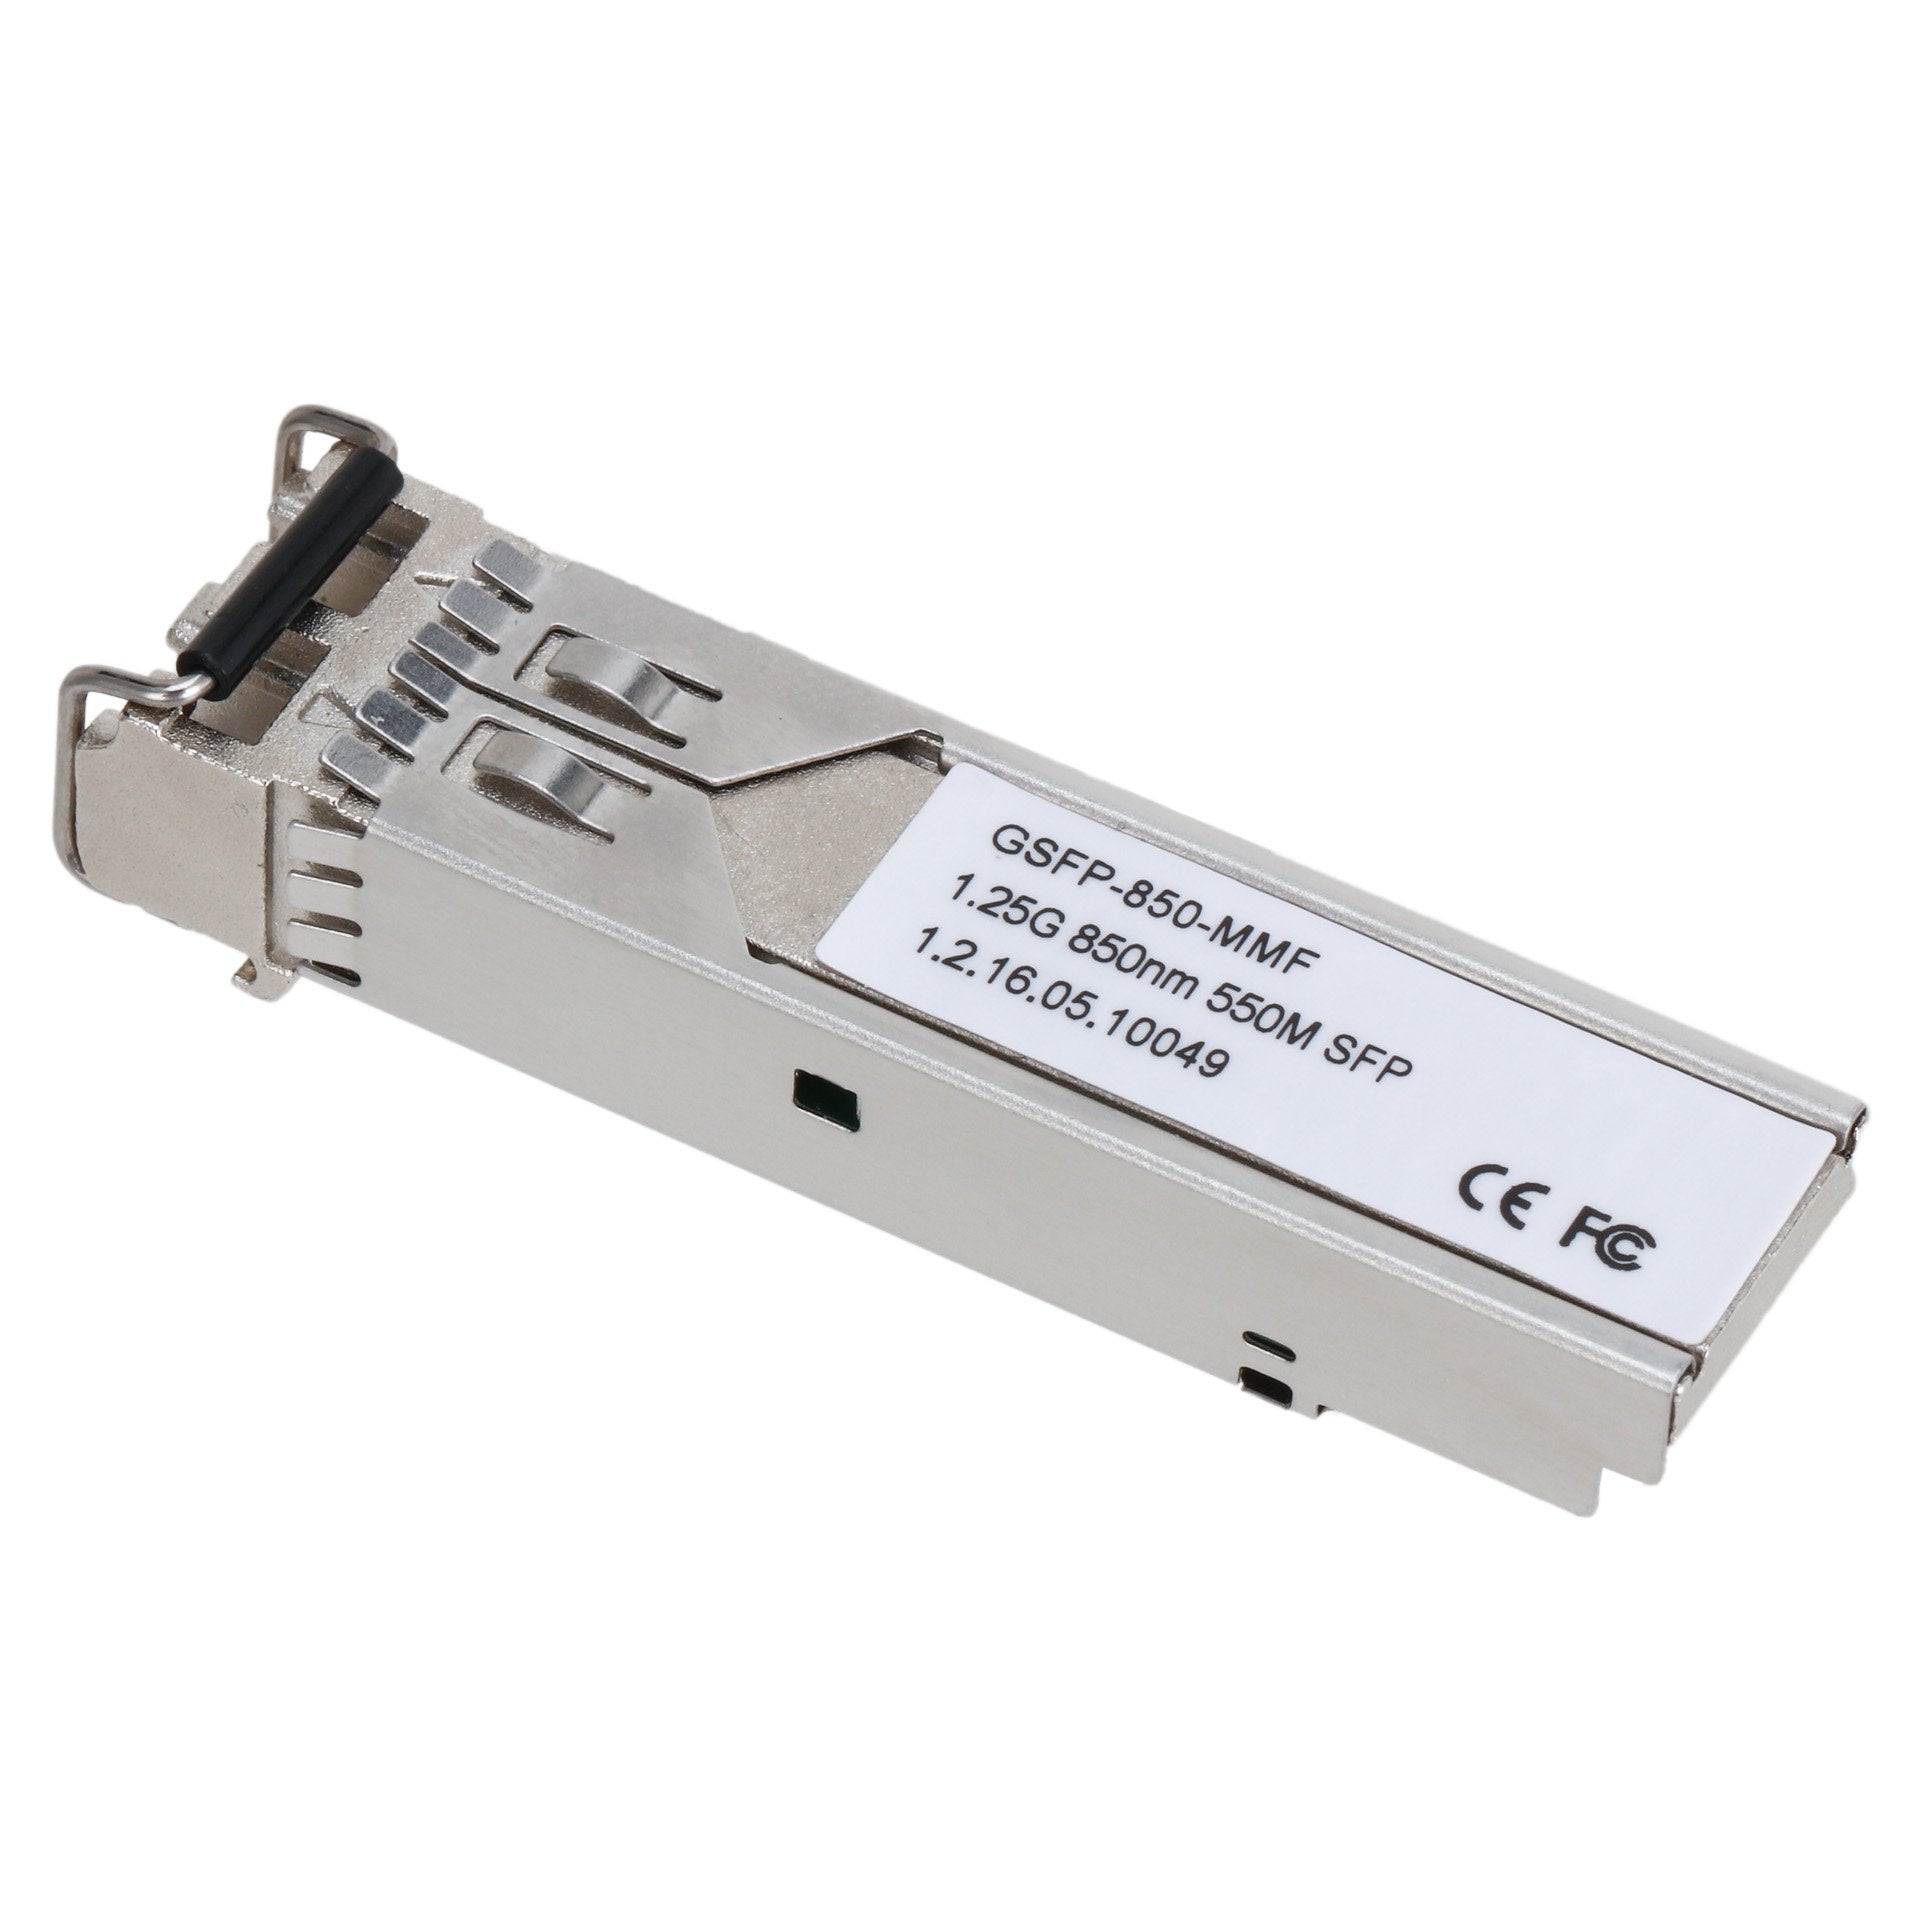 Dahua Multi-Mode SFP, LC Connector, Max. Distance 550M, Max. Data 1Gbps